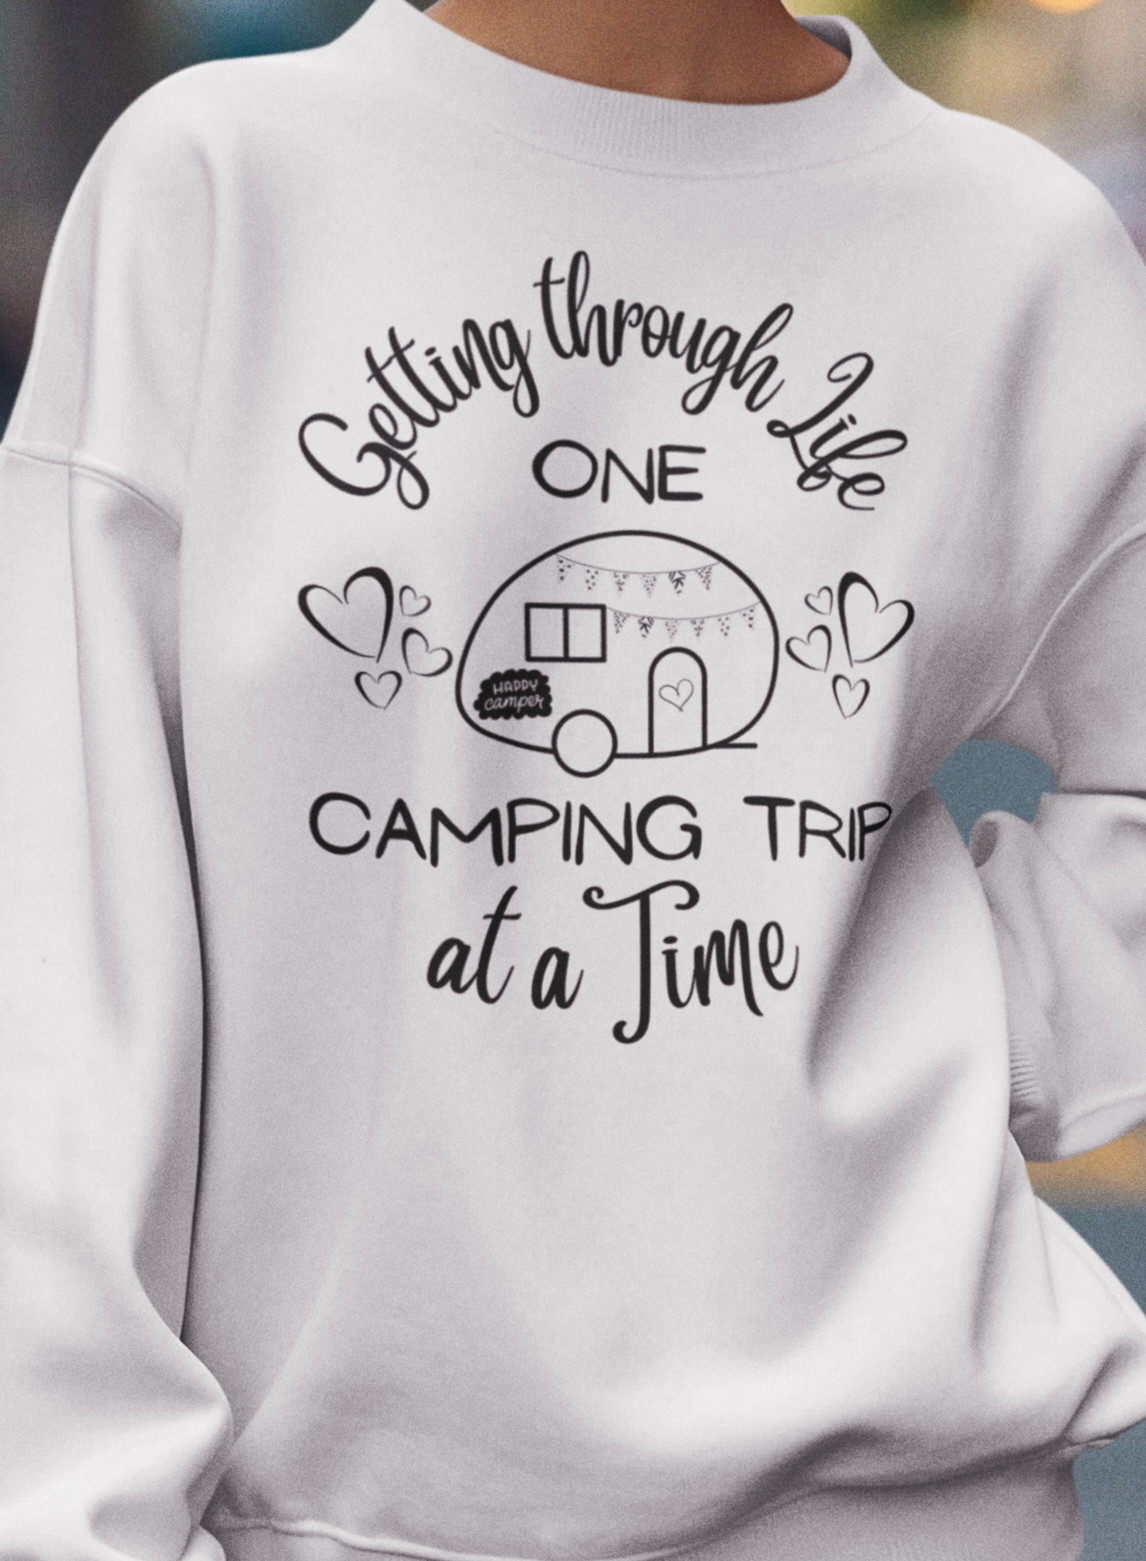 Getting through Life One Camping Trip at a Time Fall Sweatshirt, Road Trip Sweater, Funny Camper/Caravan RV Sweater Gift for Her